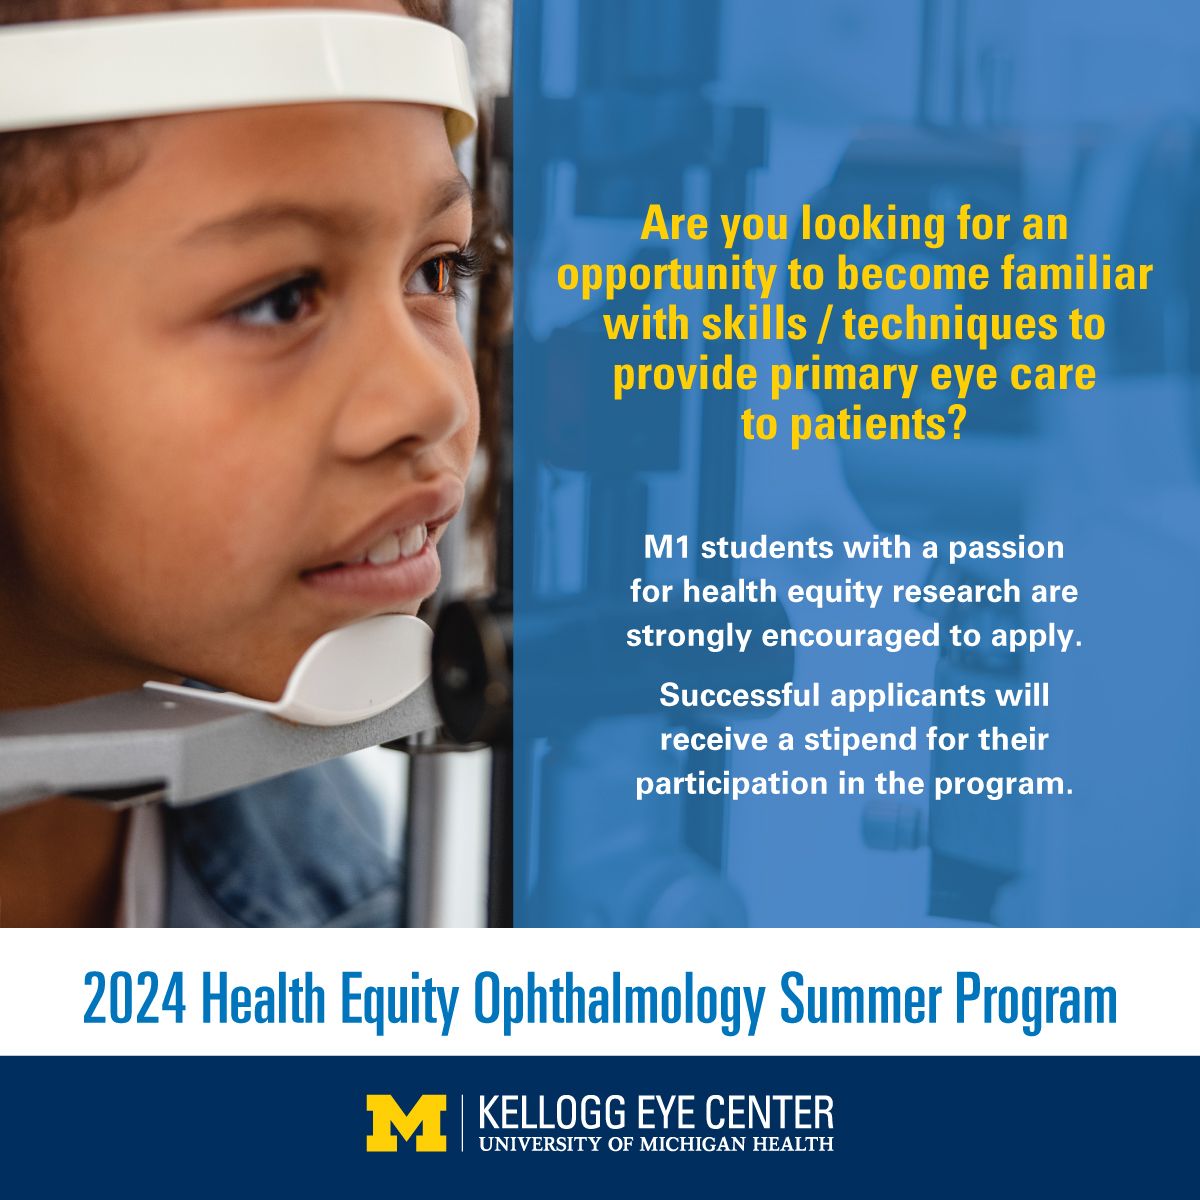 🚨 Today is the last day to apply! Level up your ophthalmology skills and contribute to health equity with our Health Equity Ophthalmology Summer Program. Apply now: michmed.org/7NDr4 #HealthEquity #OphthalmologyProgram #MedicalStudents #DeadlineAlert